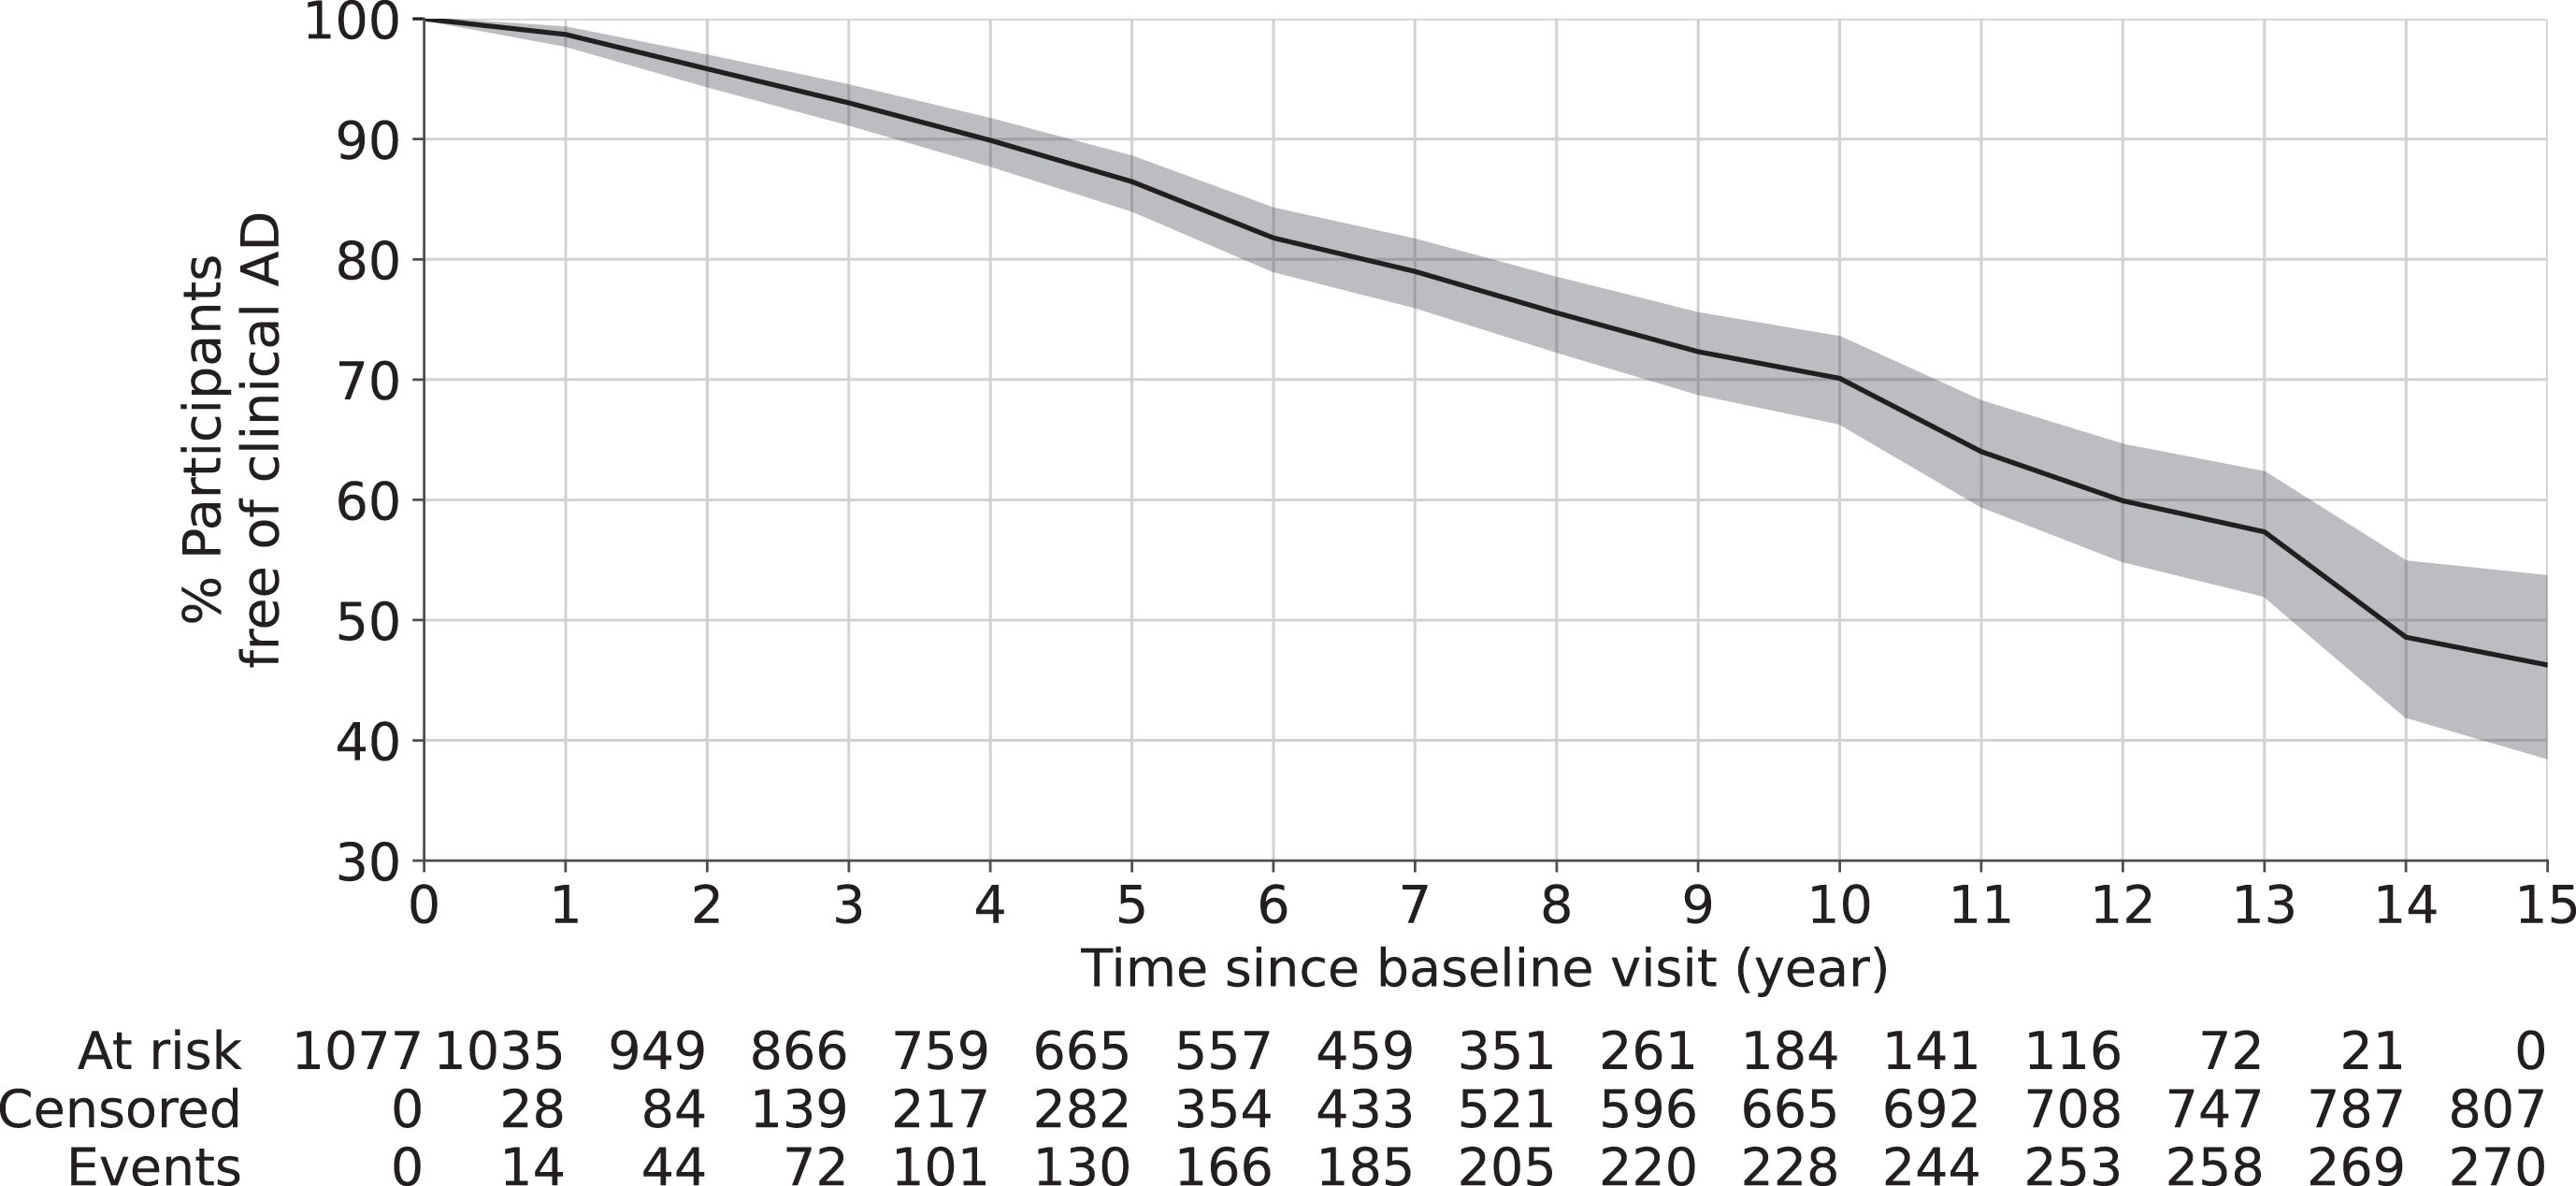 Overall survival curve using Kaplan-Meier estimator. The shaded area represents the 95% confidence interval. The risk table at the bottom shows the number of participants at risk (who has not developed clinical AD) at different years after baseline visit. Here, at risk is defined as participants who have not developed clinical AD yet; censored is defined as participants lost-to-follow up due to any reason; and event is defined as being diagnosed of clinical AD.